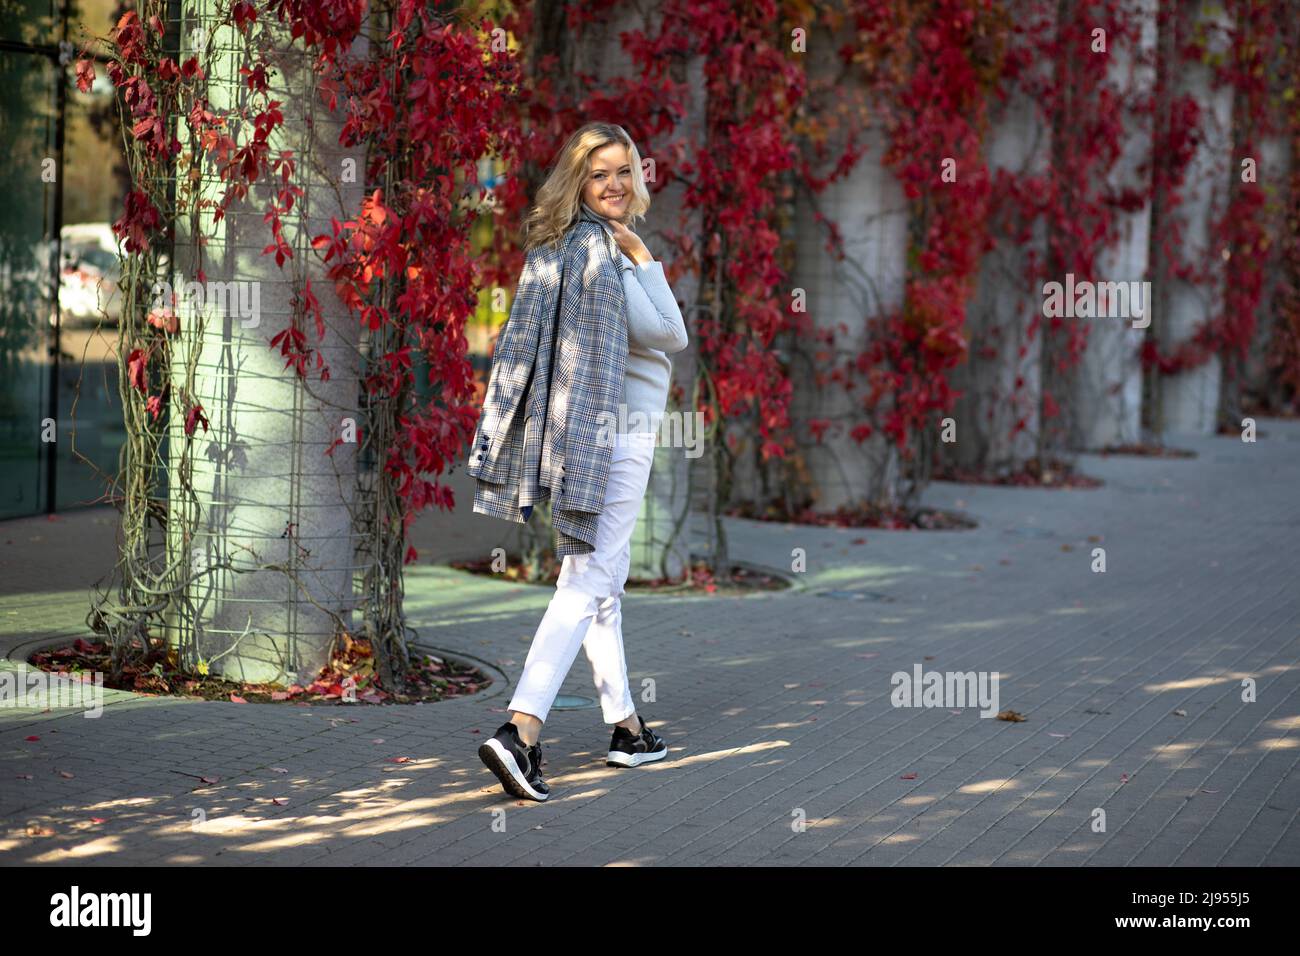 Attractive blonde 35-40 years old looks around walking around autumn city. She is illuminated by rays of sun and is happy enjoying beautiful day Stock Photo